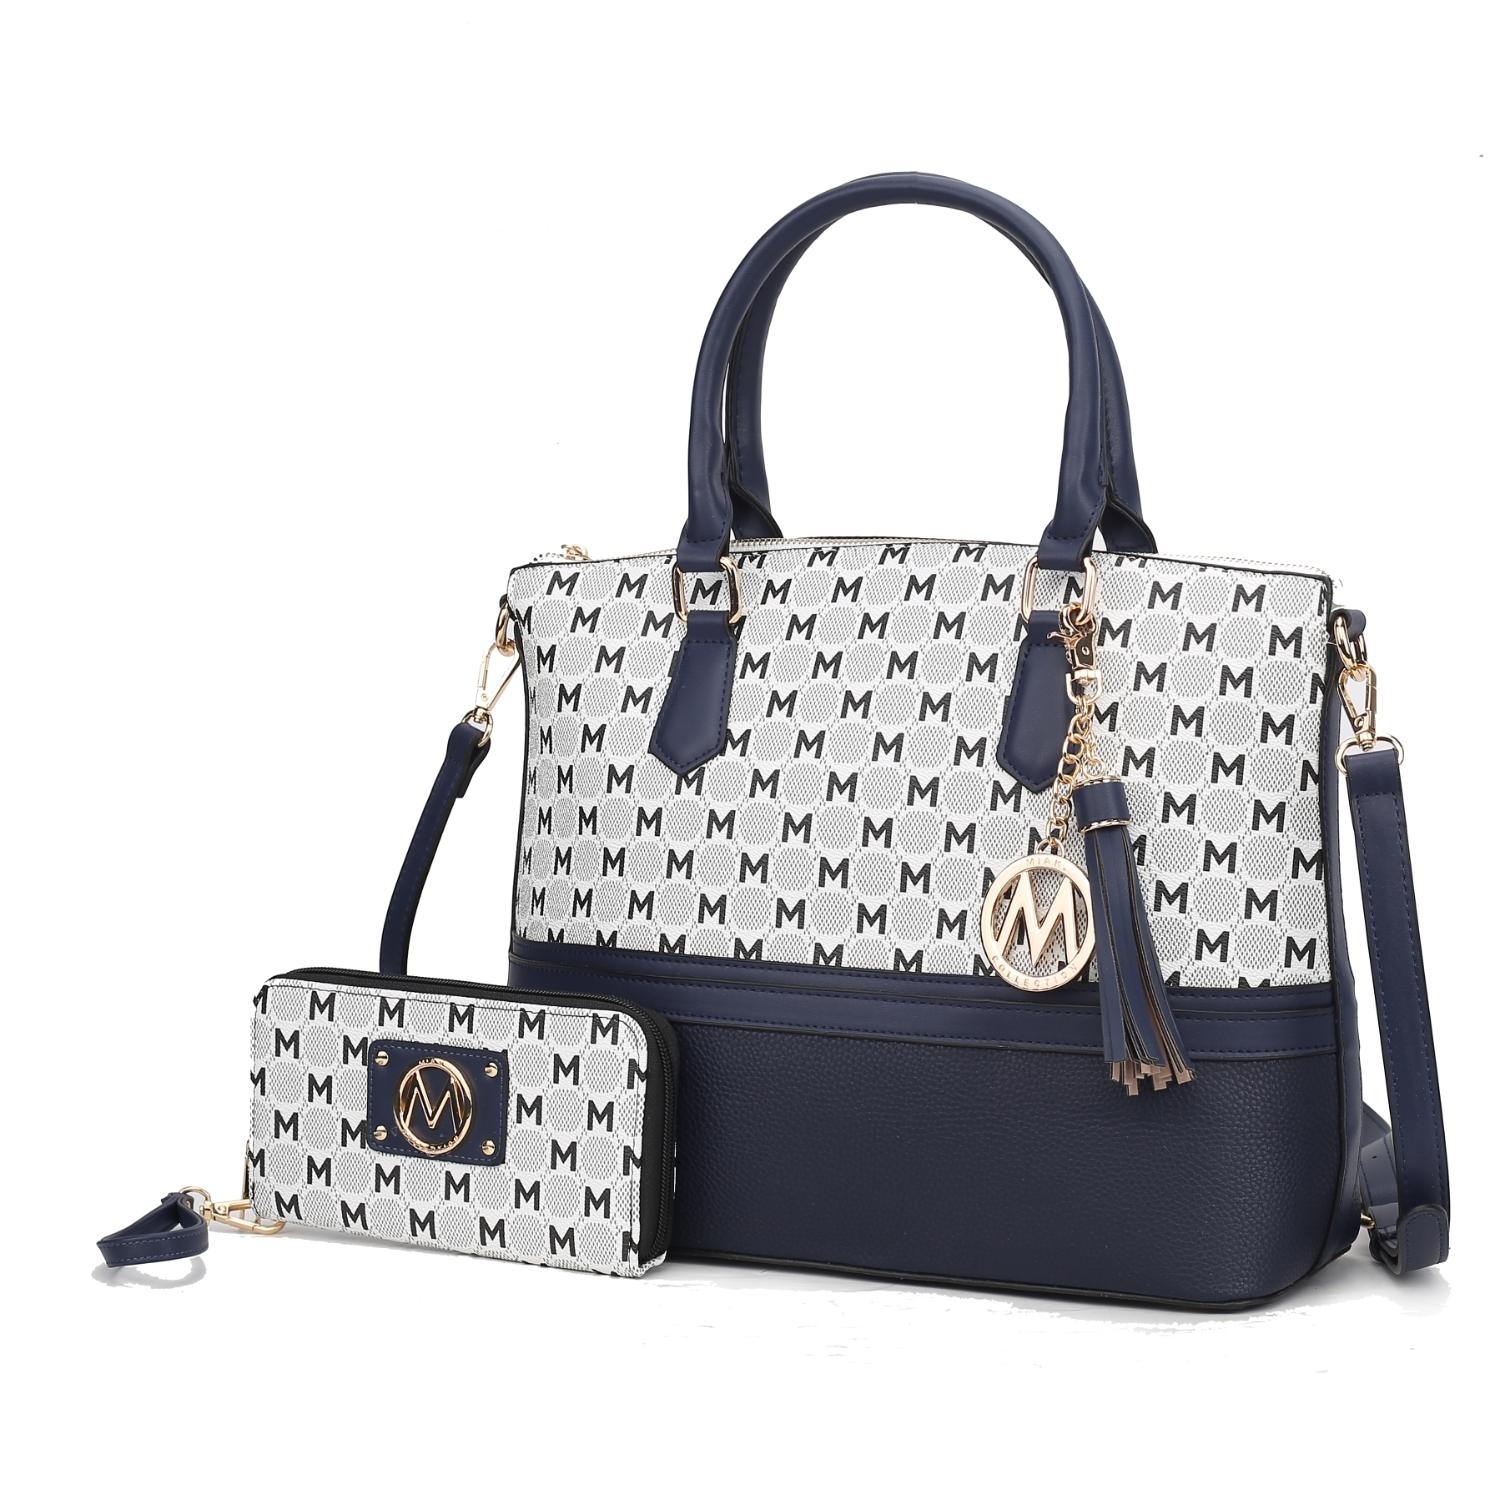 MKF Collection Saylor Circular M Emblem Print Women's Tote Bag With Matching Wristlet Wallet 2 Pieces By Mia K - Navy